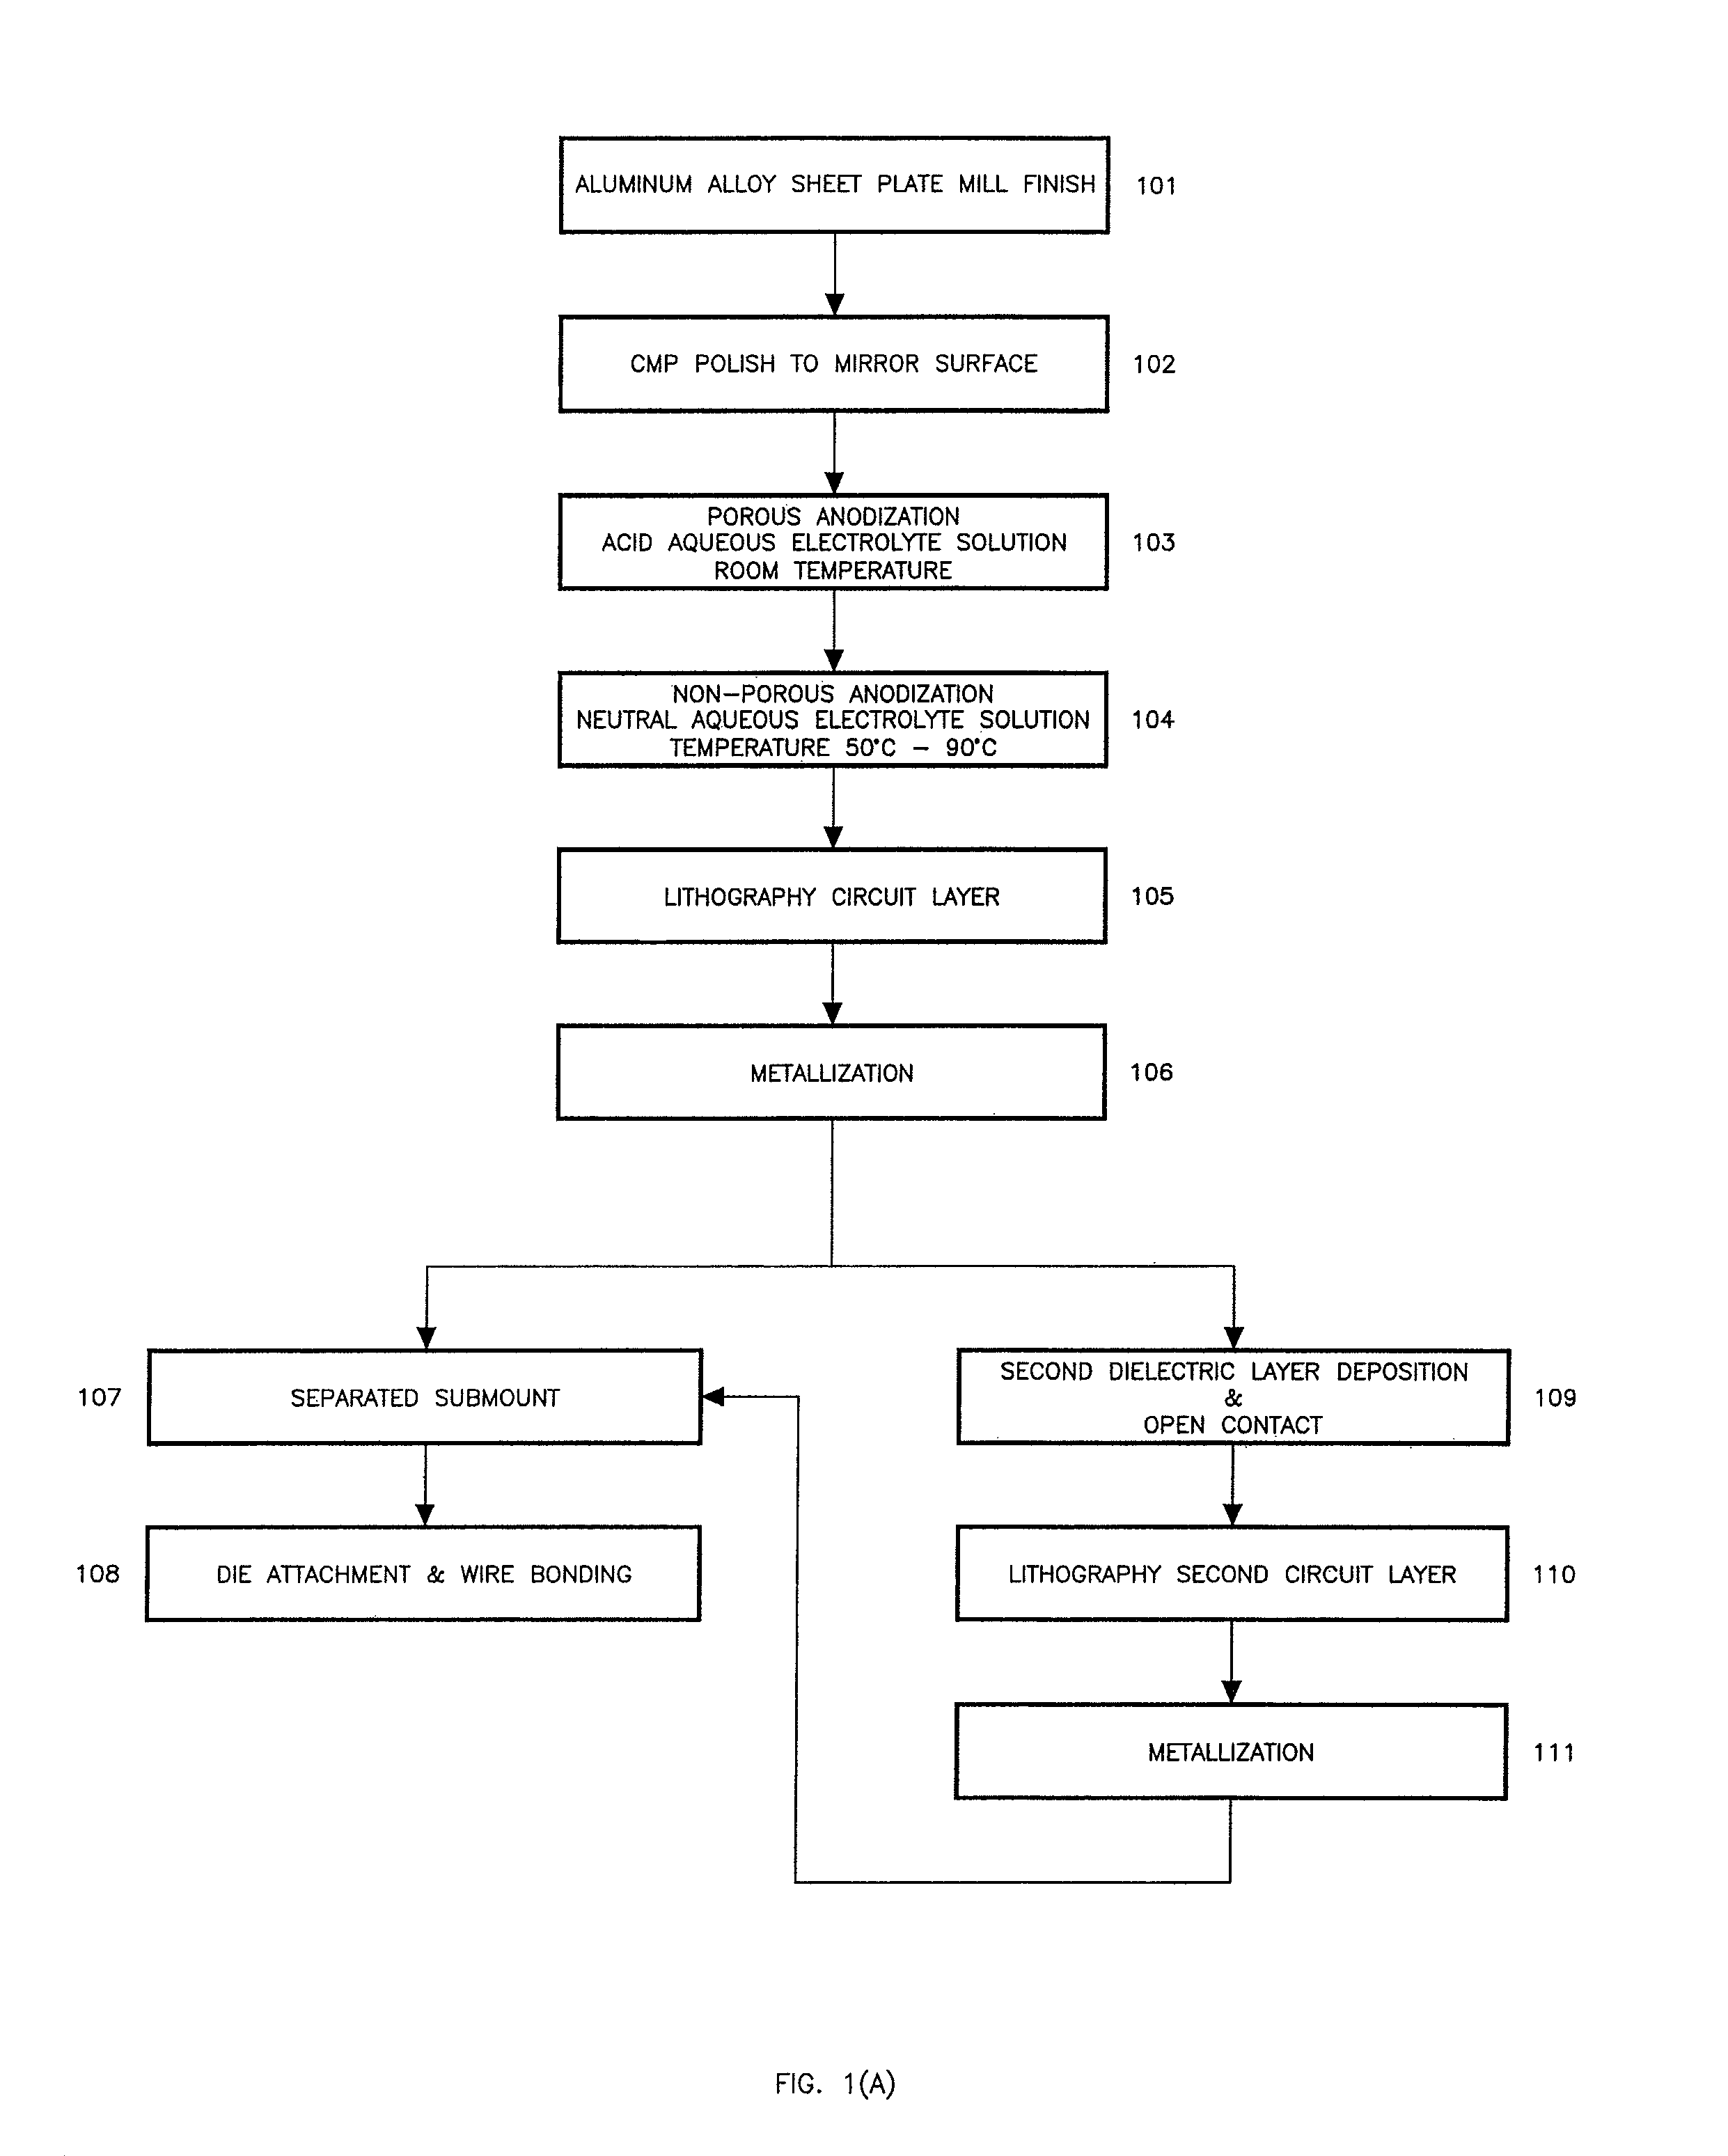 Light emitting diode submount with high thermal conductivity for high power operation